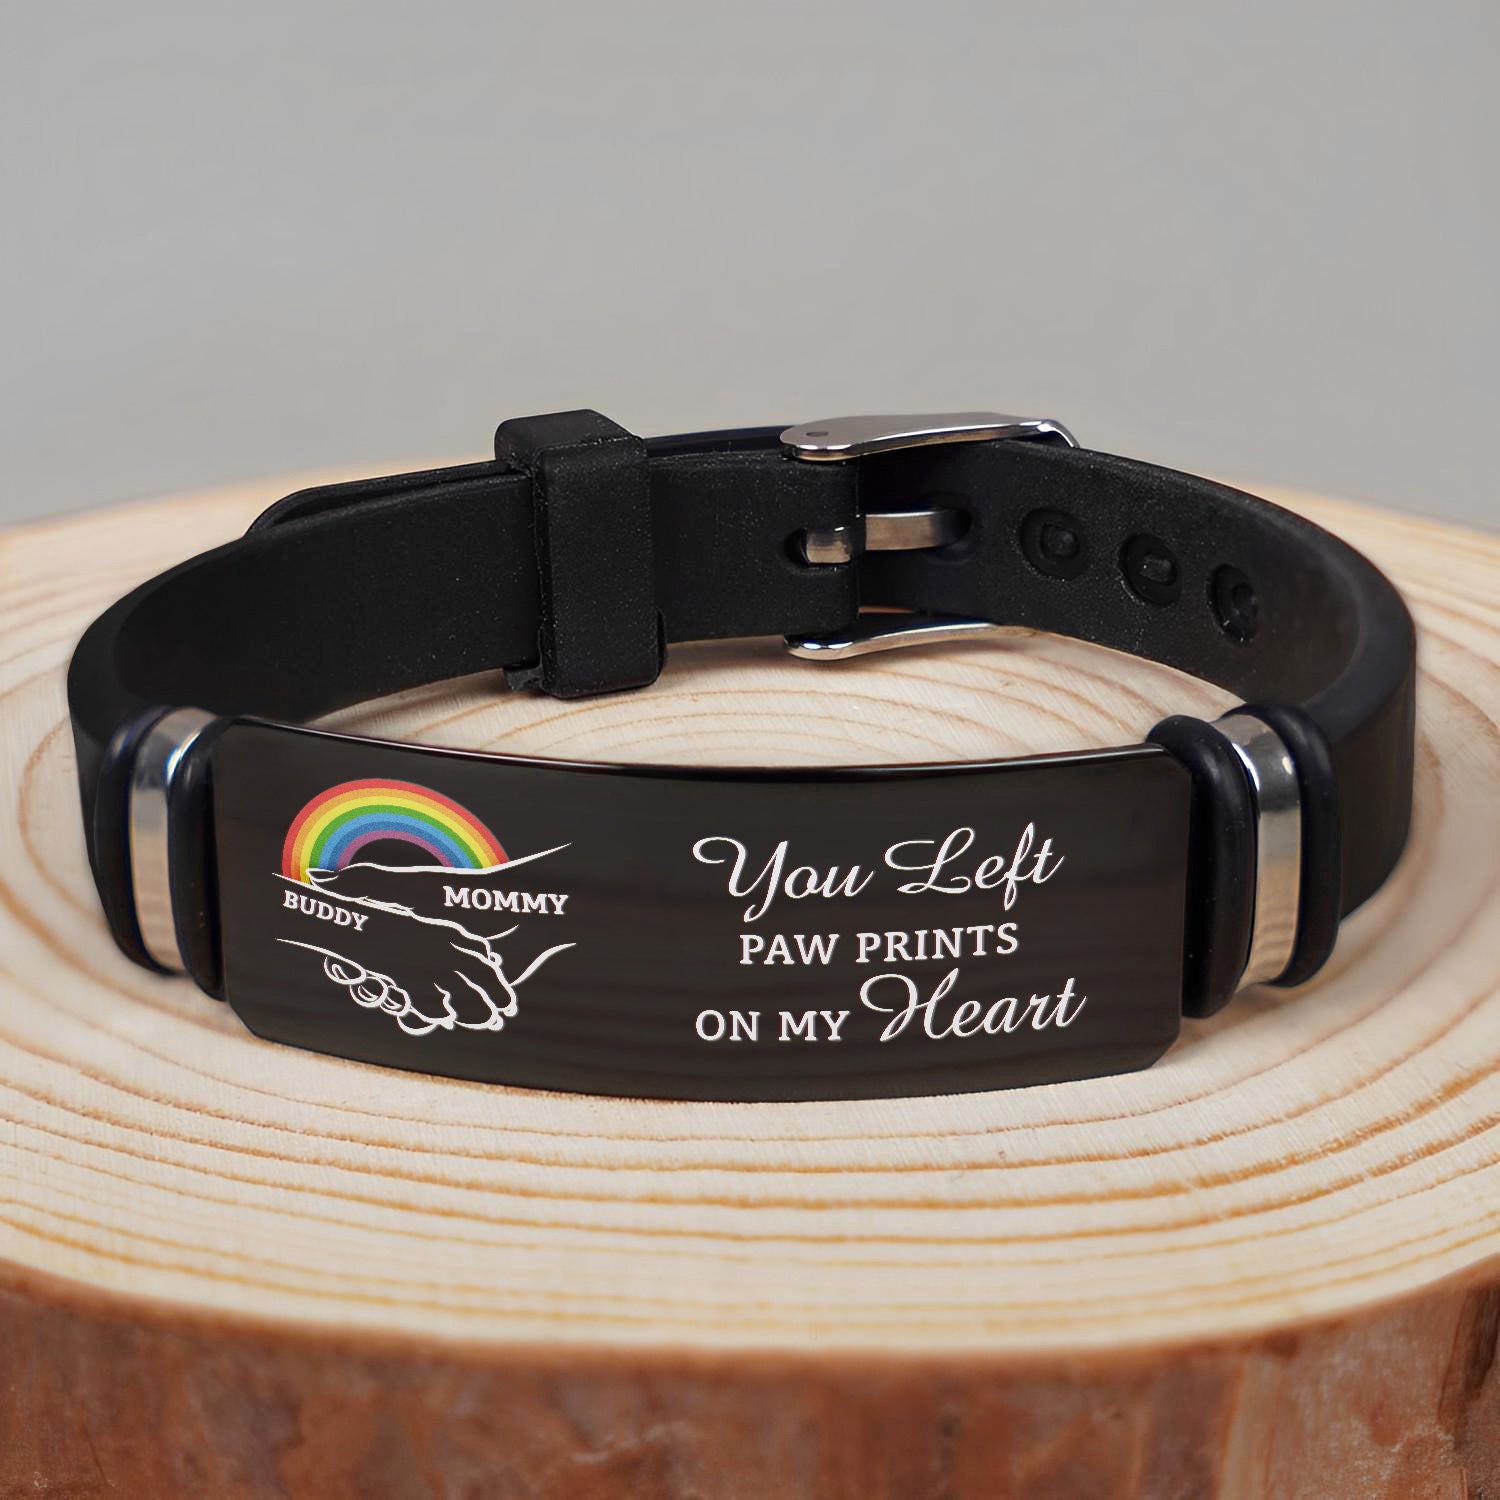 You Left Paw Prints On My Heart - Memorial Gift For Dog Lovers, Dog Mom, Dog Dad - Personalized Engraved Bracelet